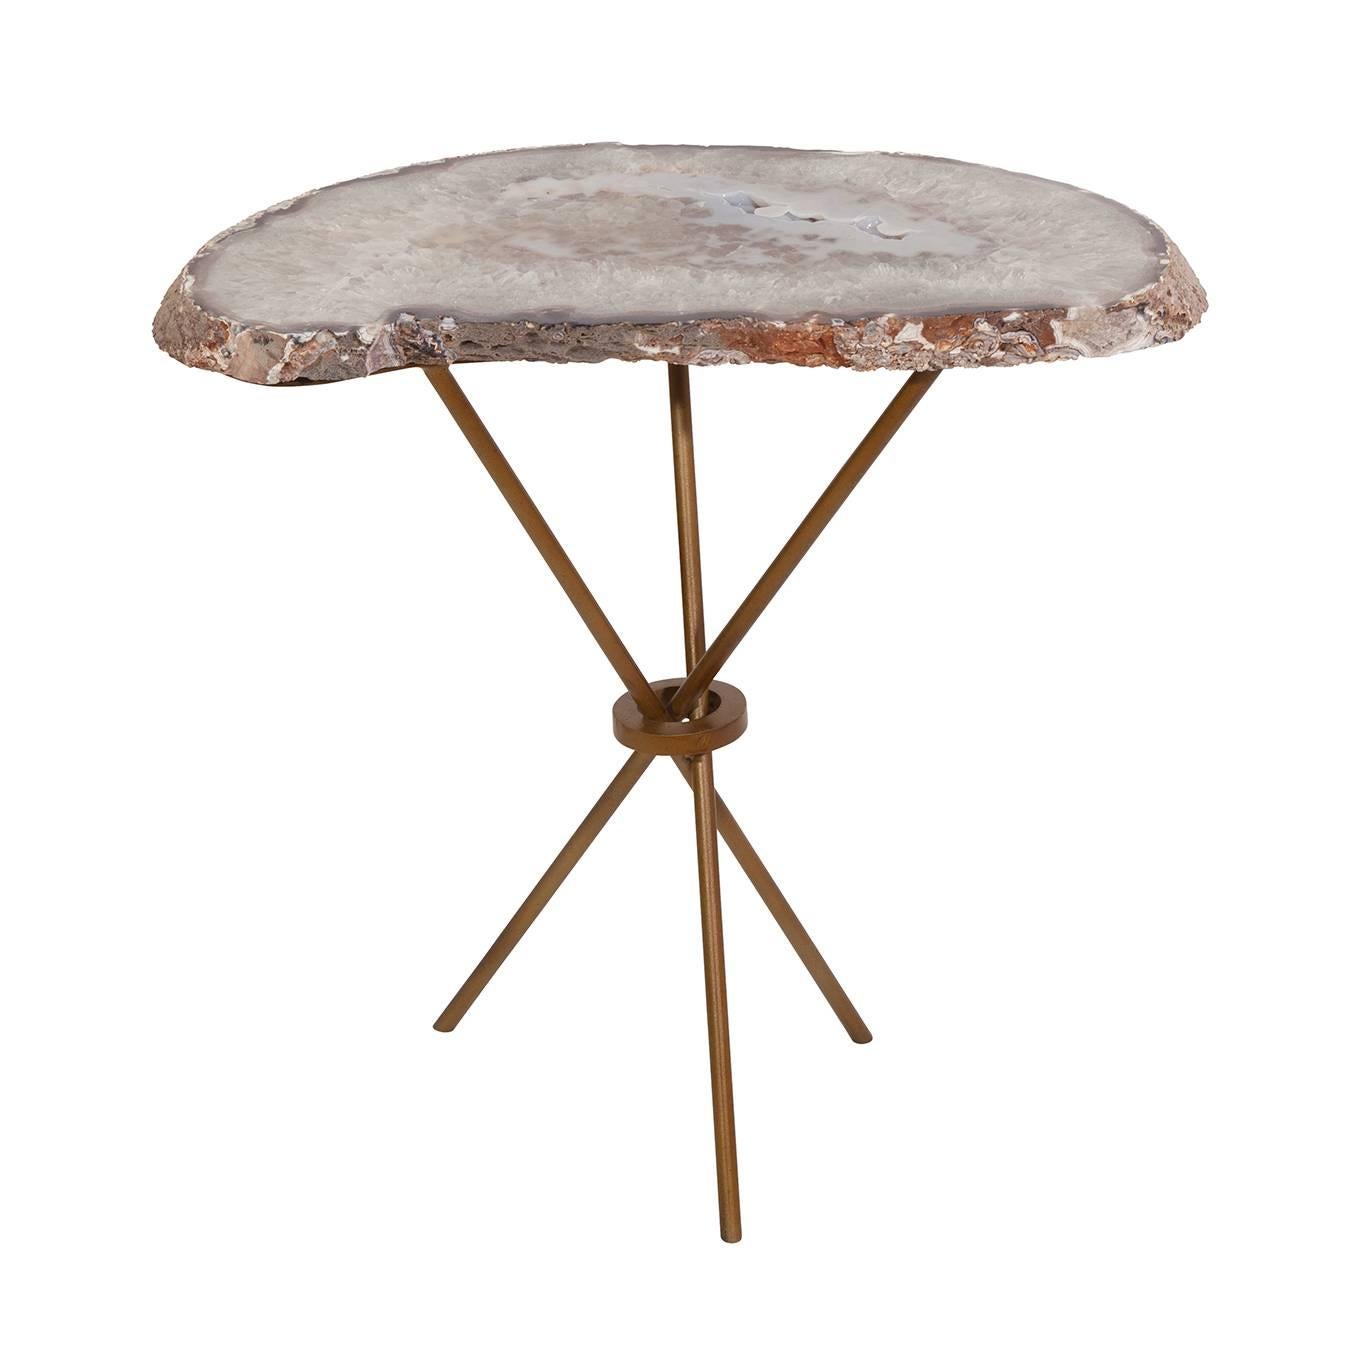 Custom geode slab side table.

Additional custom options are available, including custom agate/geode slabs and custom-designed bases in a variety of metal finishes.